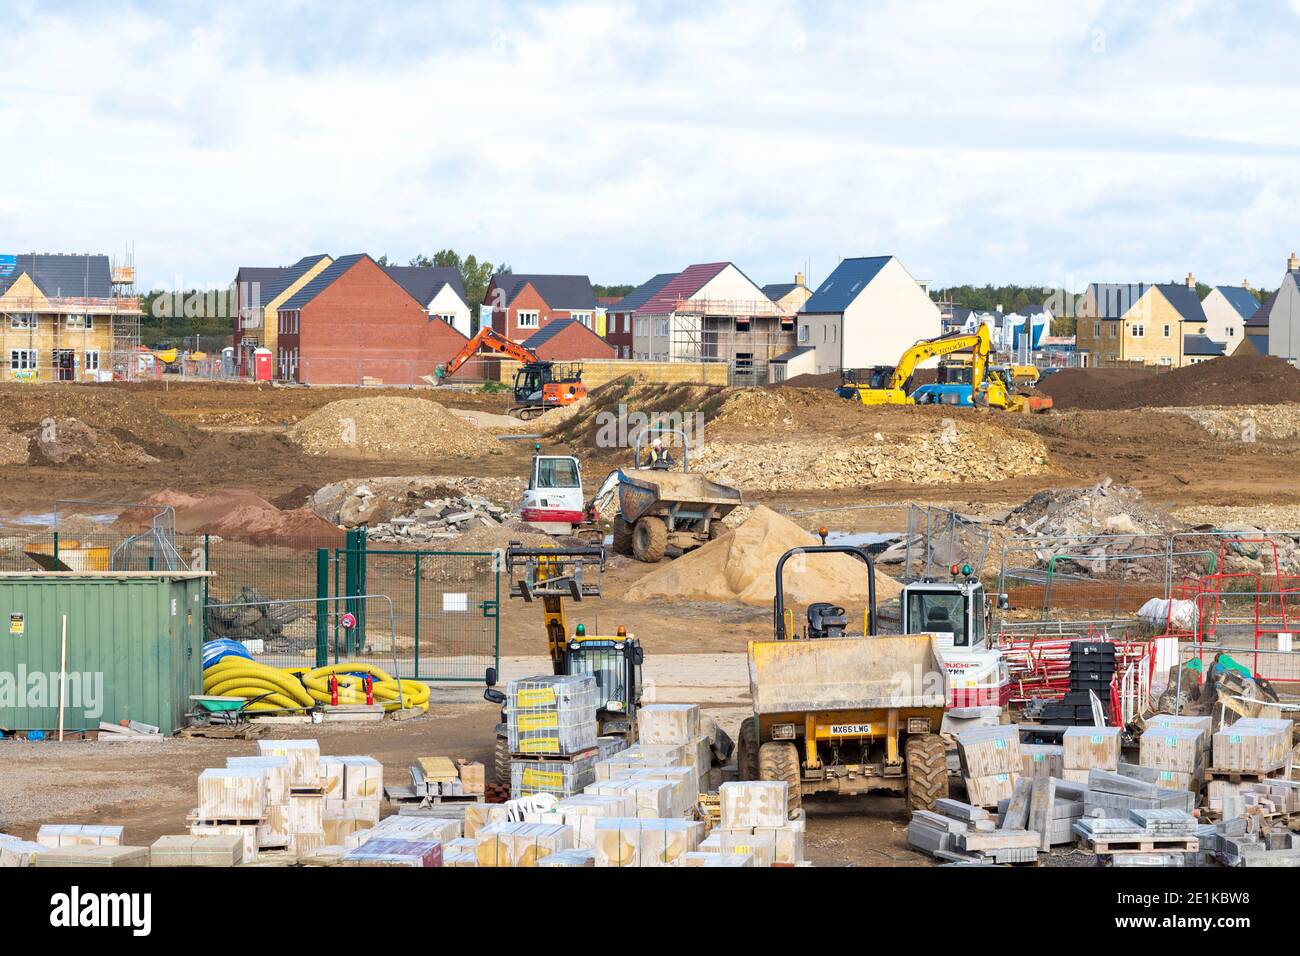 New housing development at West Witney on the outskirts of Oxford, West Oxfordshire, England due to population growth Stock Photo